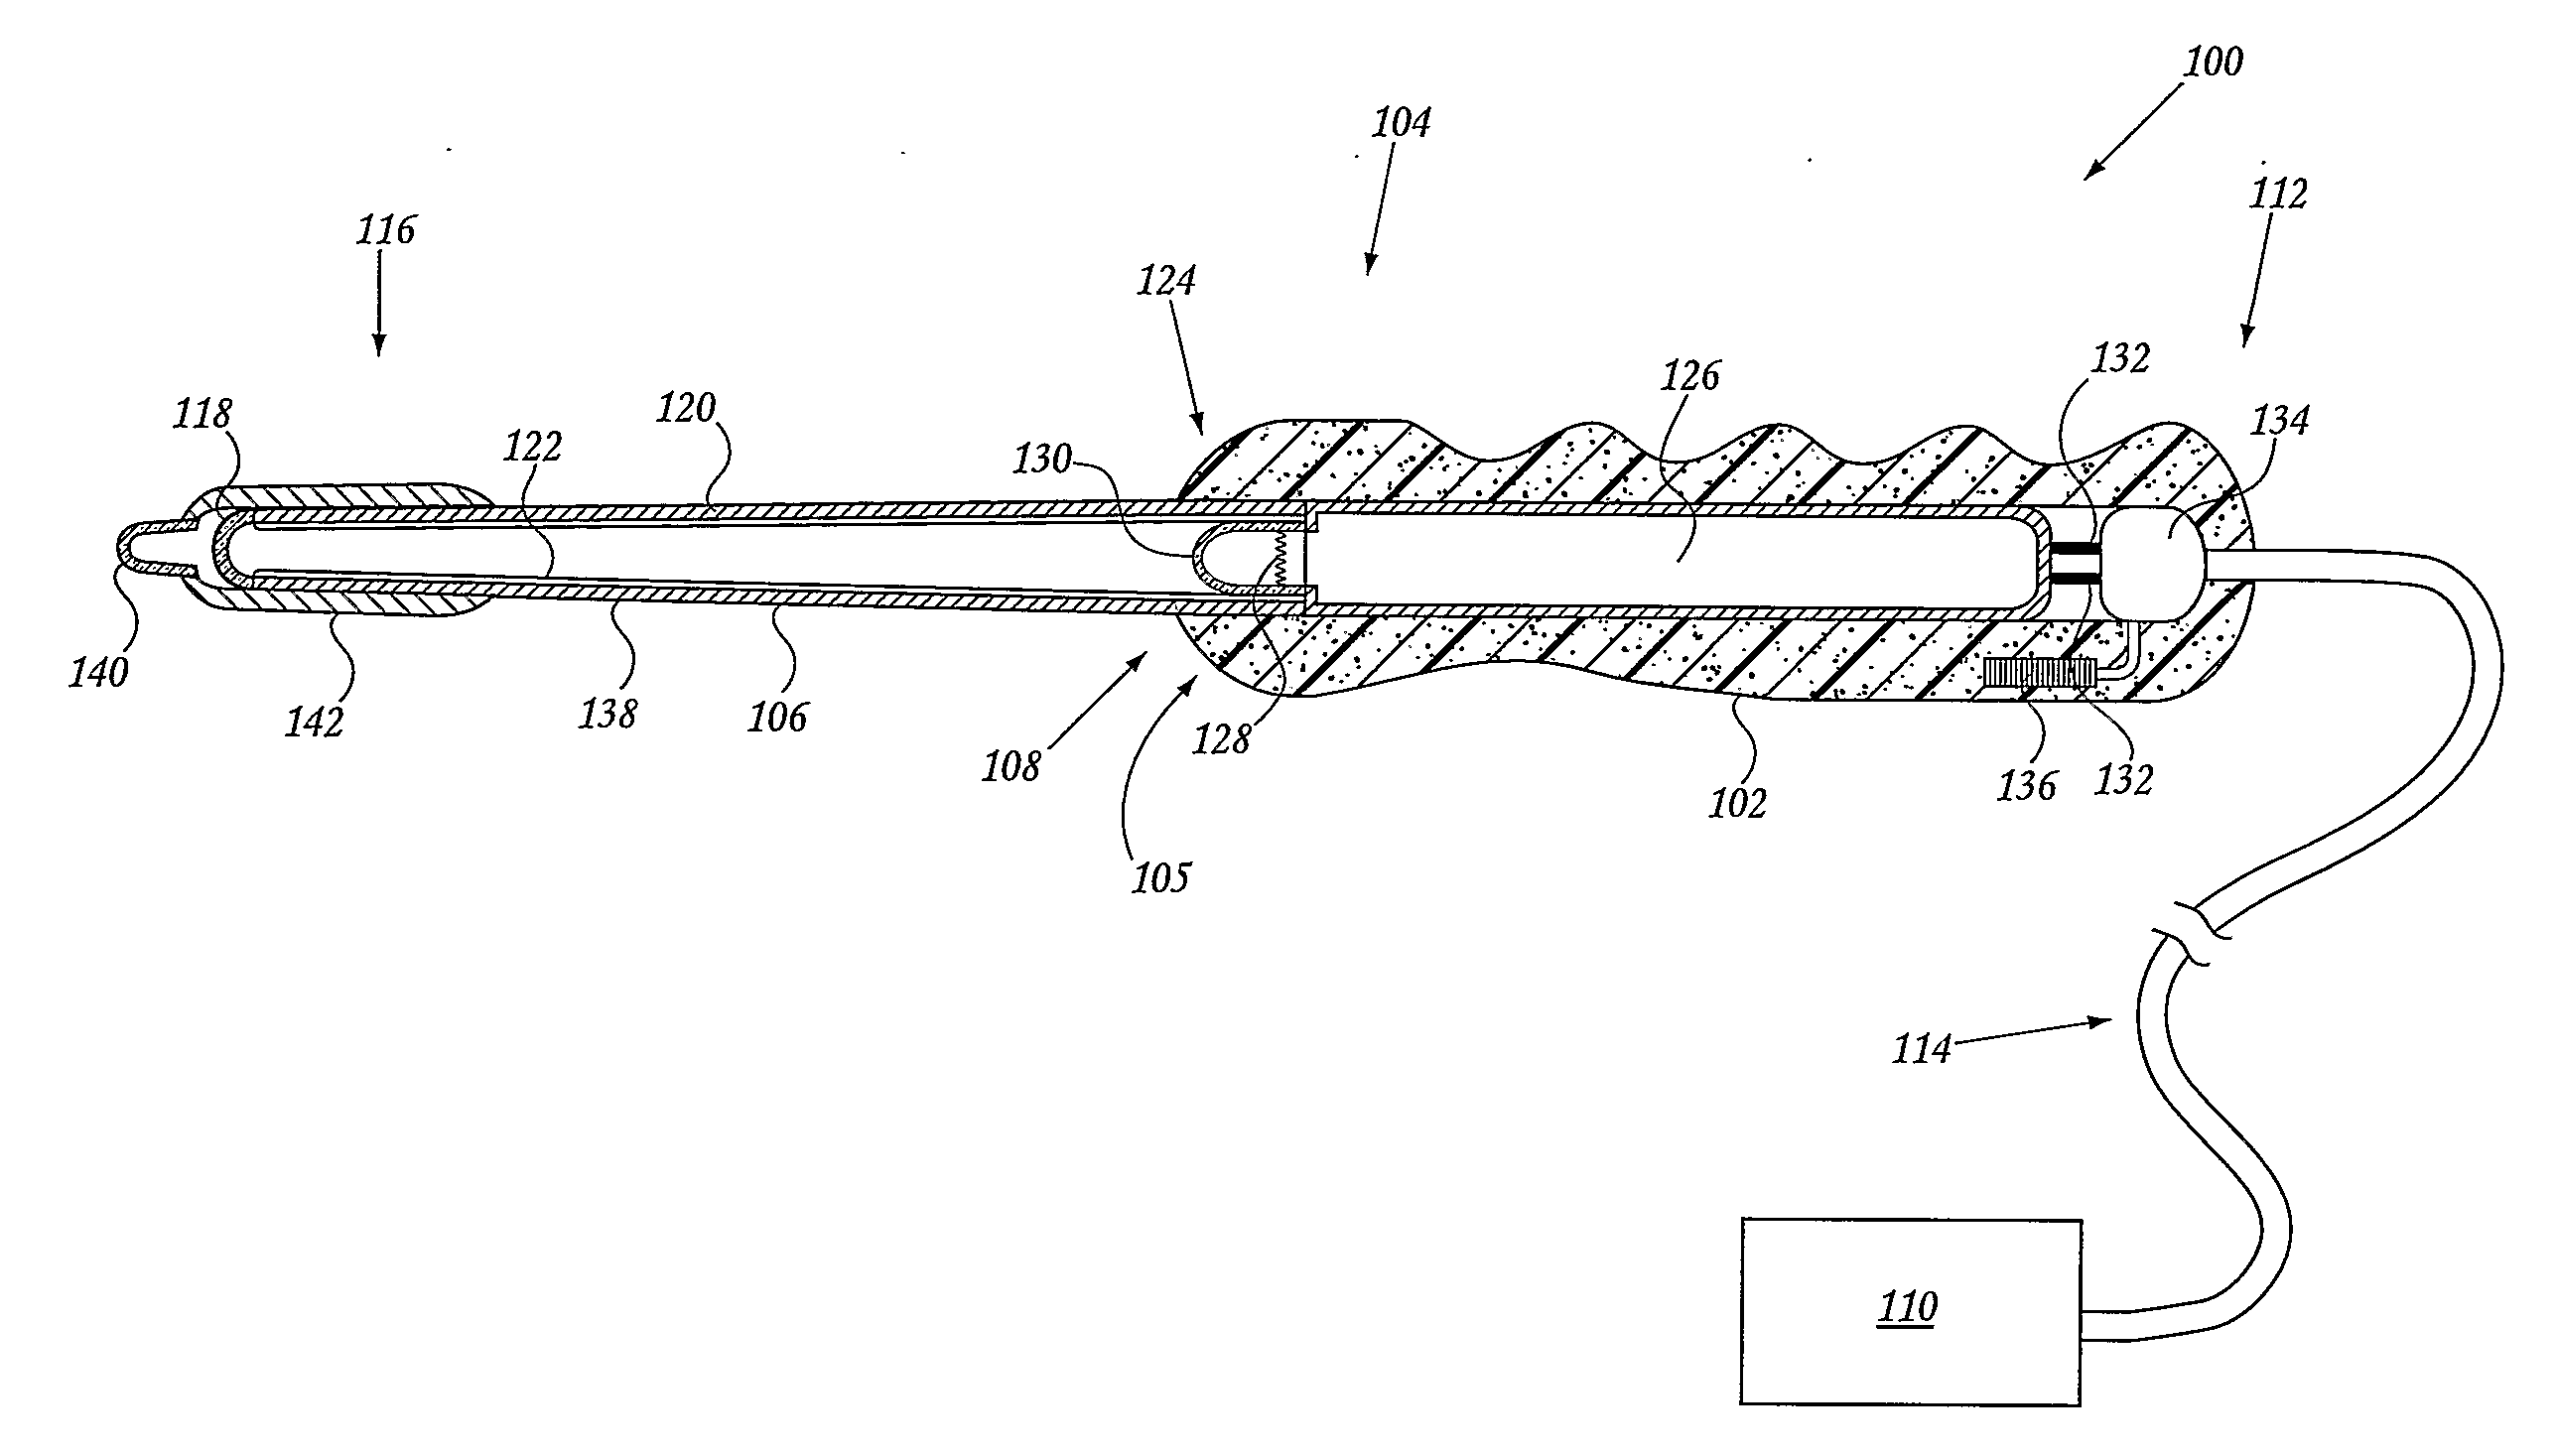 Optical Therapy Devices, Systems, Kits and Methods for Providing Therapy to a body Cavity